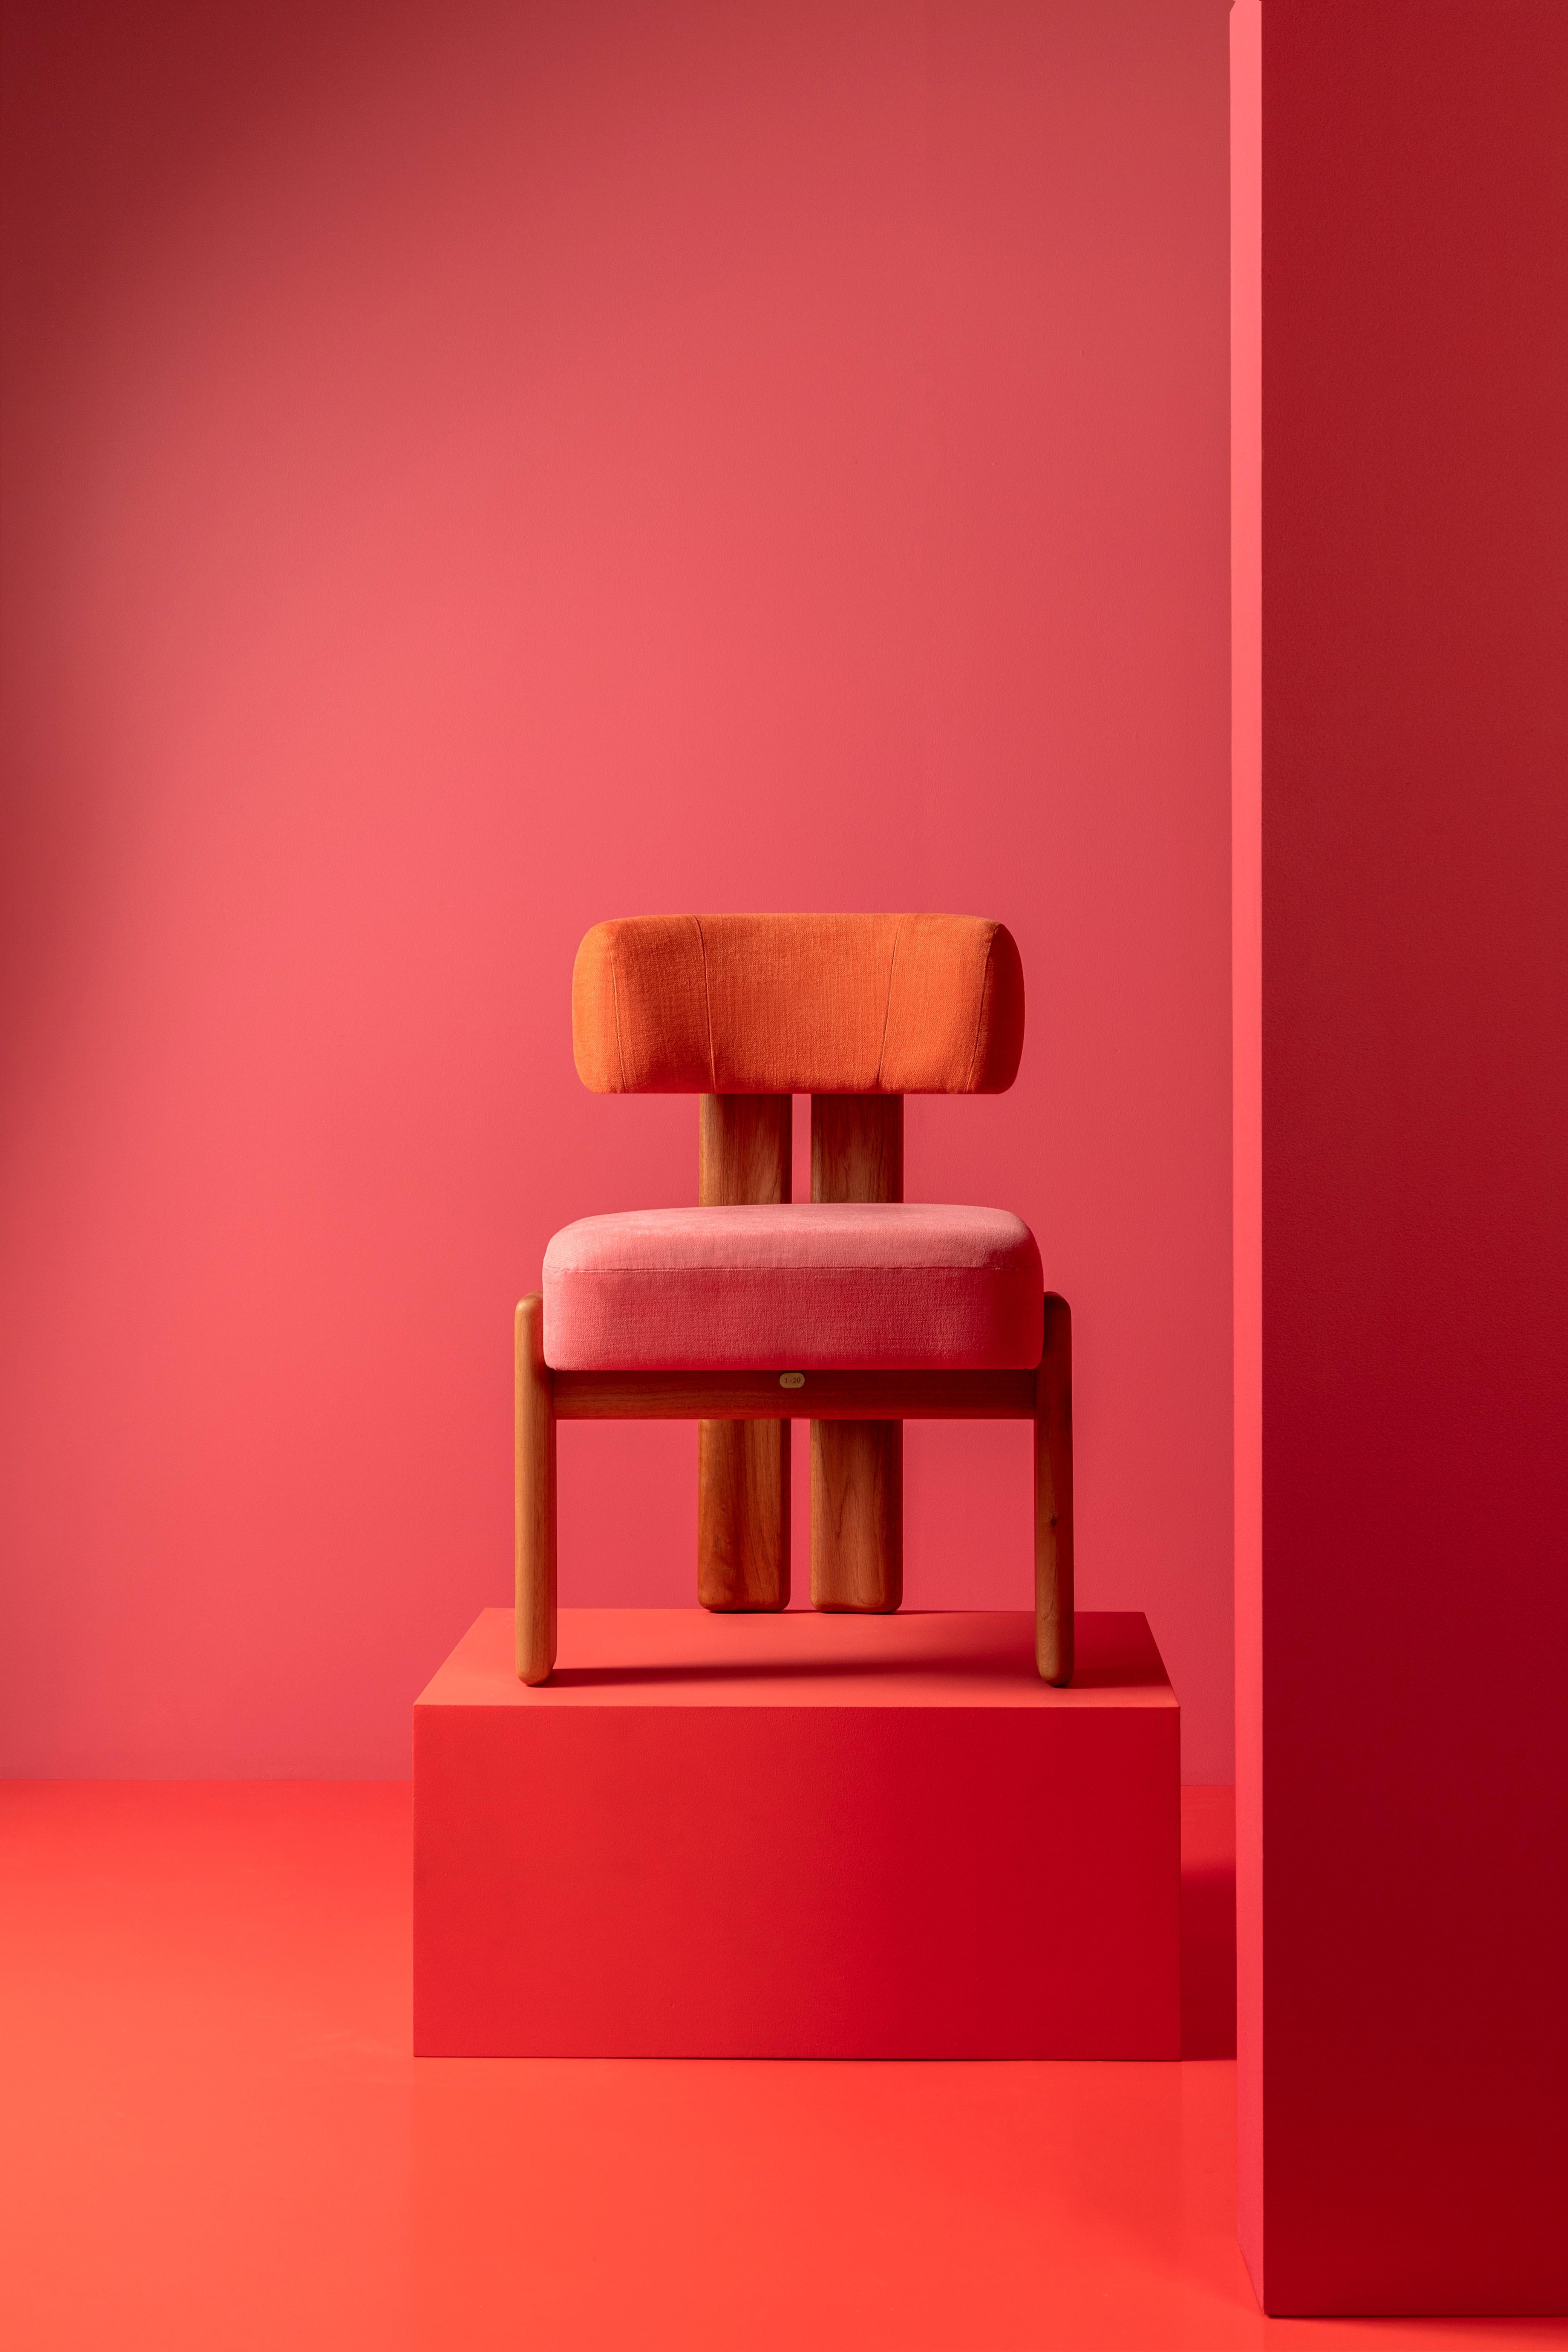 Inspired by the work of Bauhaus textile artist Anni Albers, this version of the de la paz chair, named after the artist, is an exploration of the use of colour through collaboration.
MAYE, experts in colorimetry, were inspired by two of Anni's works